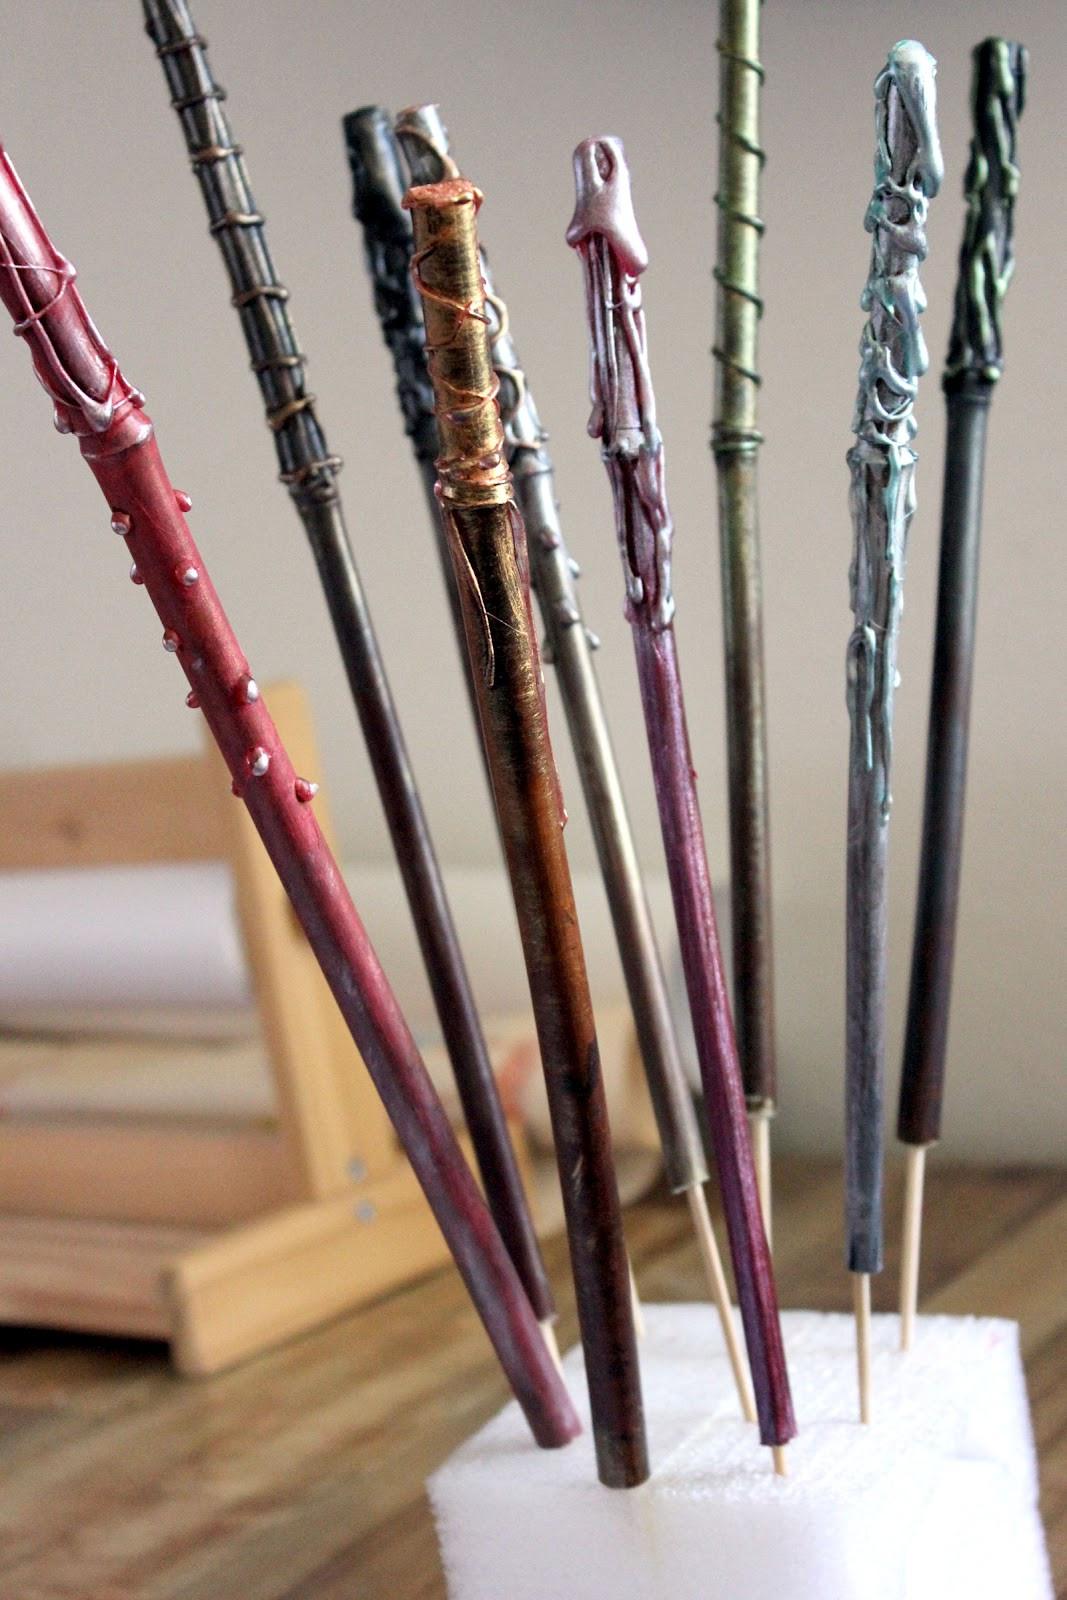 Harry Potter Wand Diy
 Wand Tutorial for DIY Craft at a Harry Potter Party